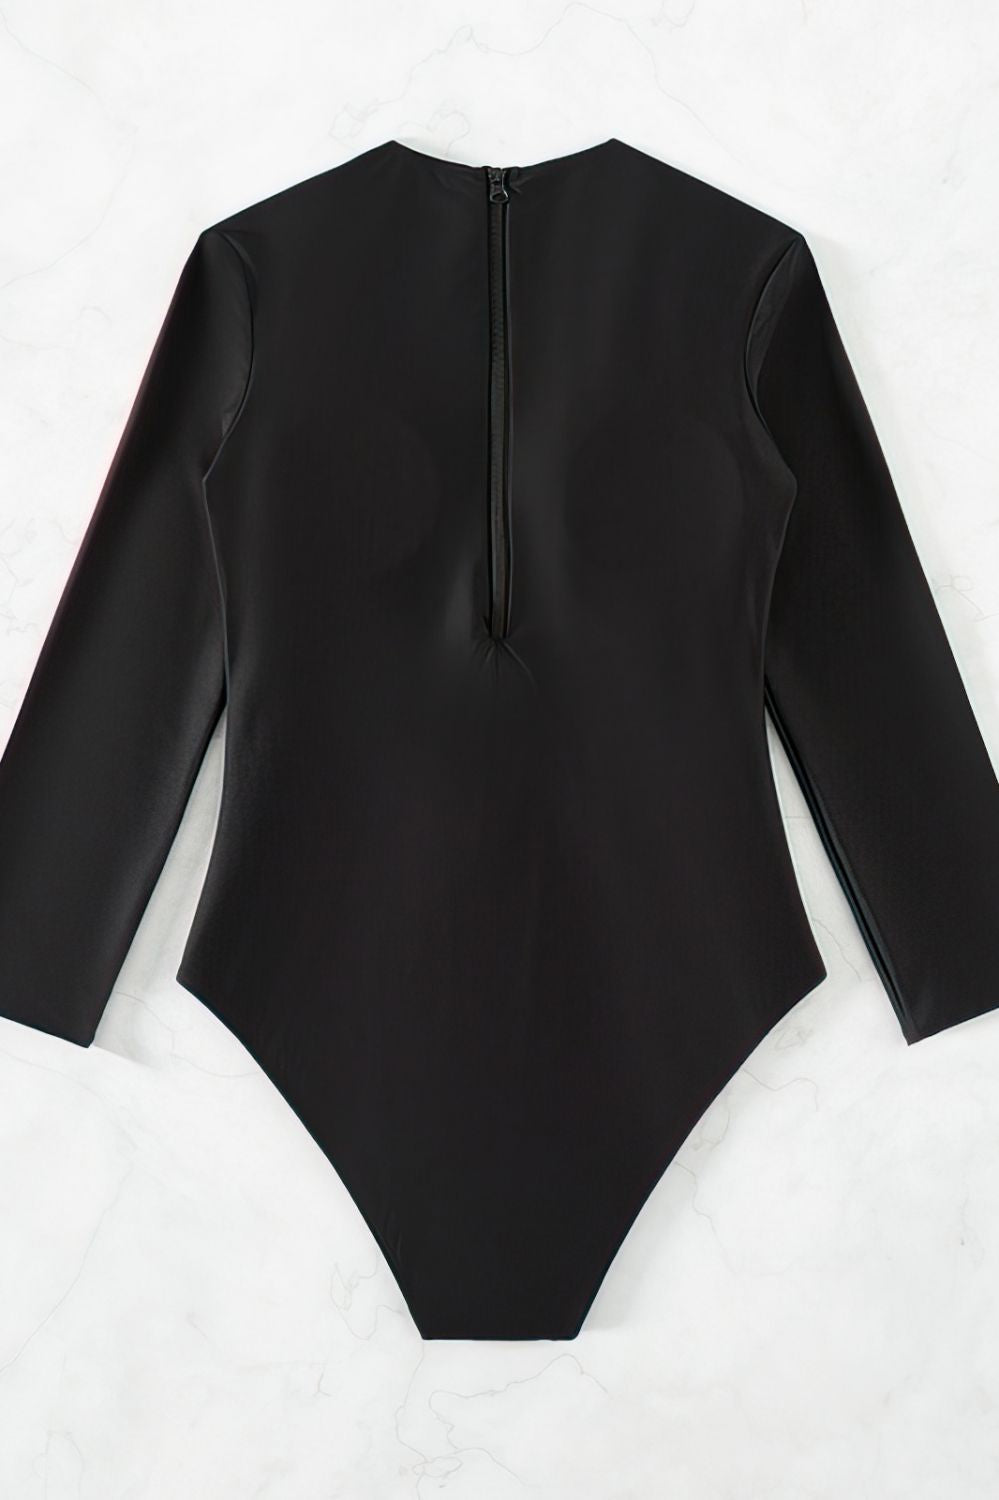 Cut Out One Piece Swimsuit High Neck Long Sleeve Bathing Suit